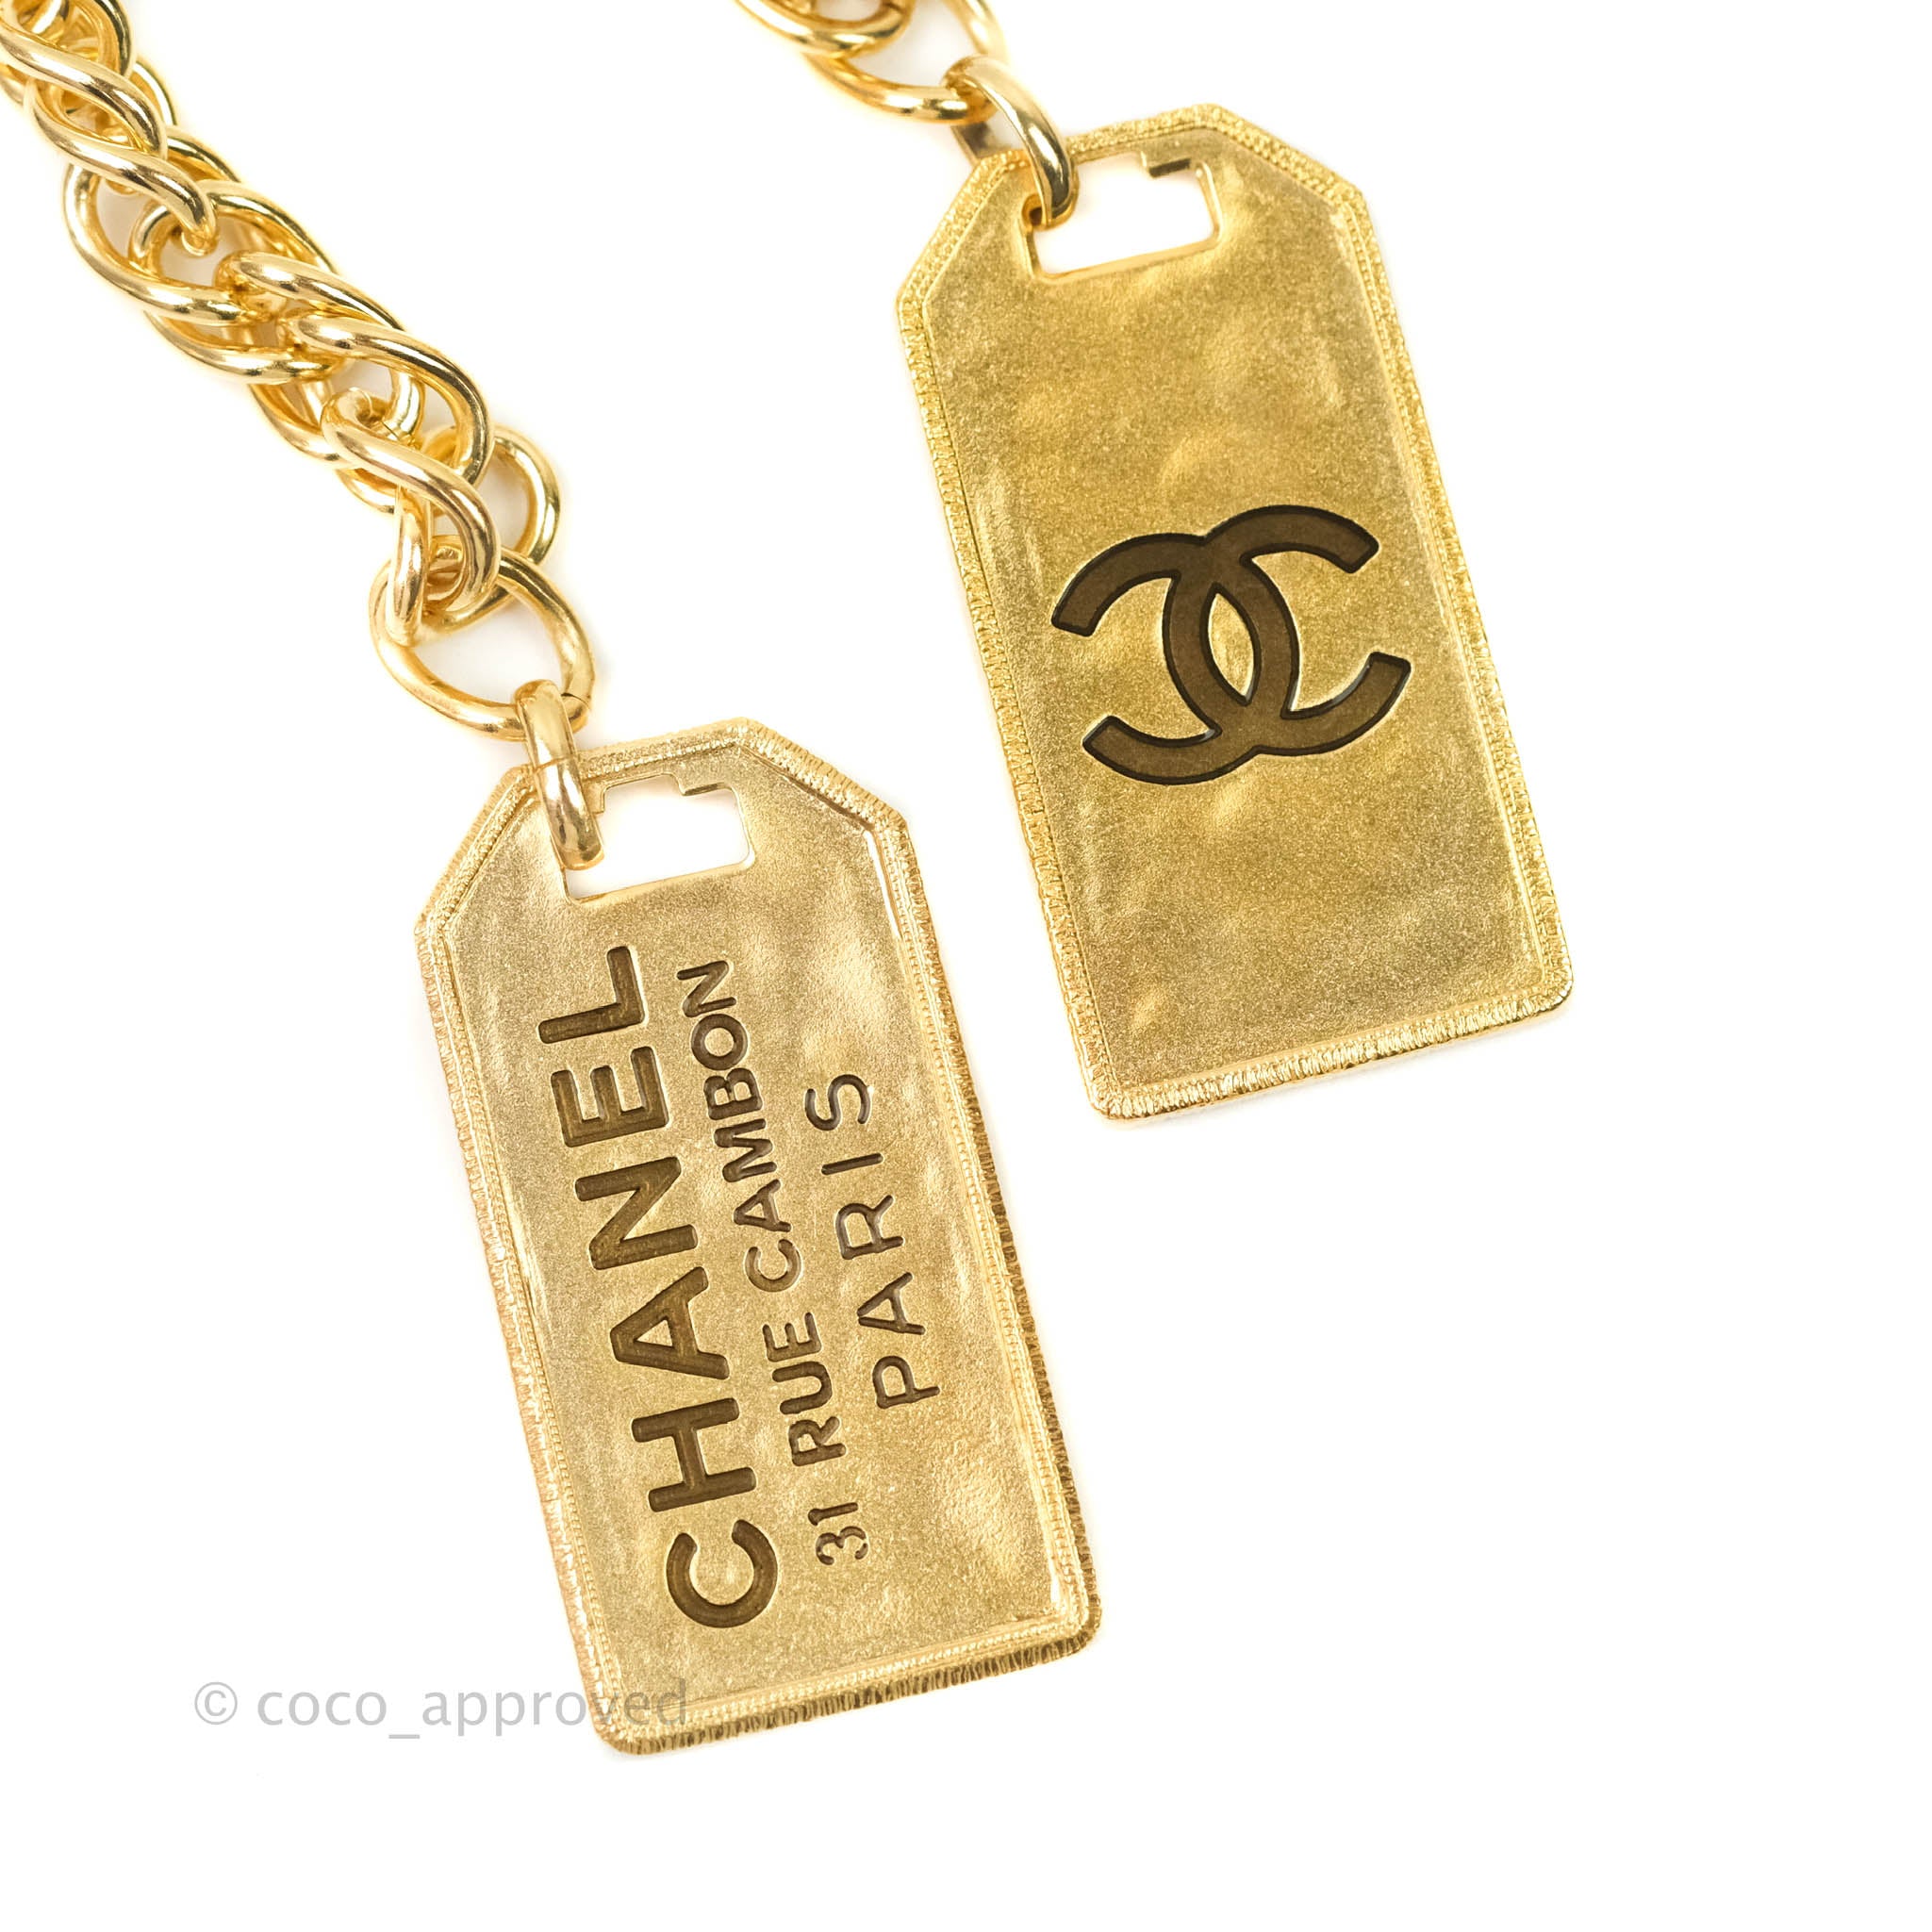 Chanel Metal Tag Charm Necklace Gold Tone – Coco Approved Studio